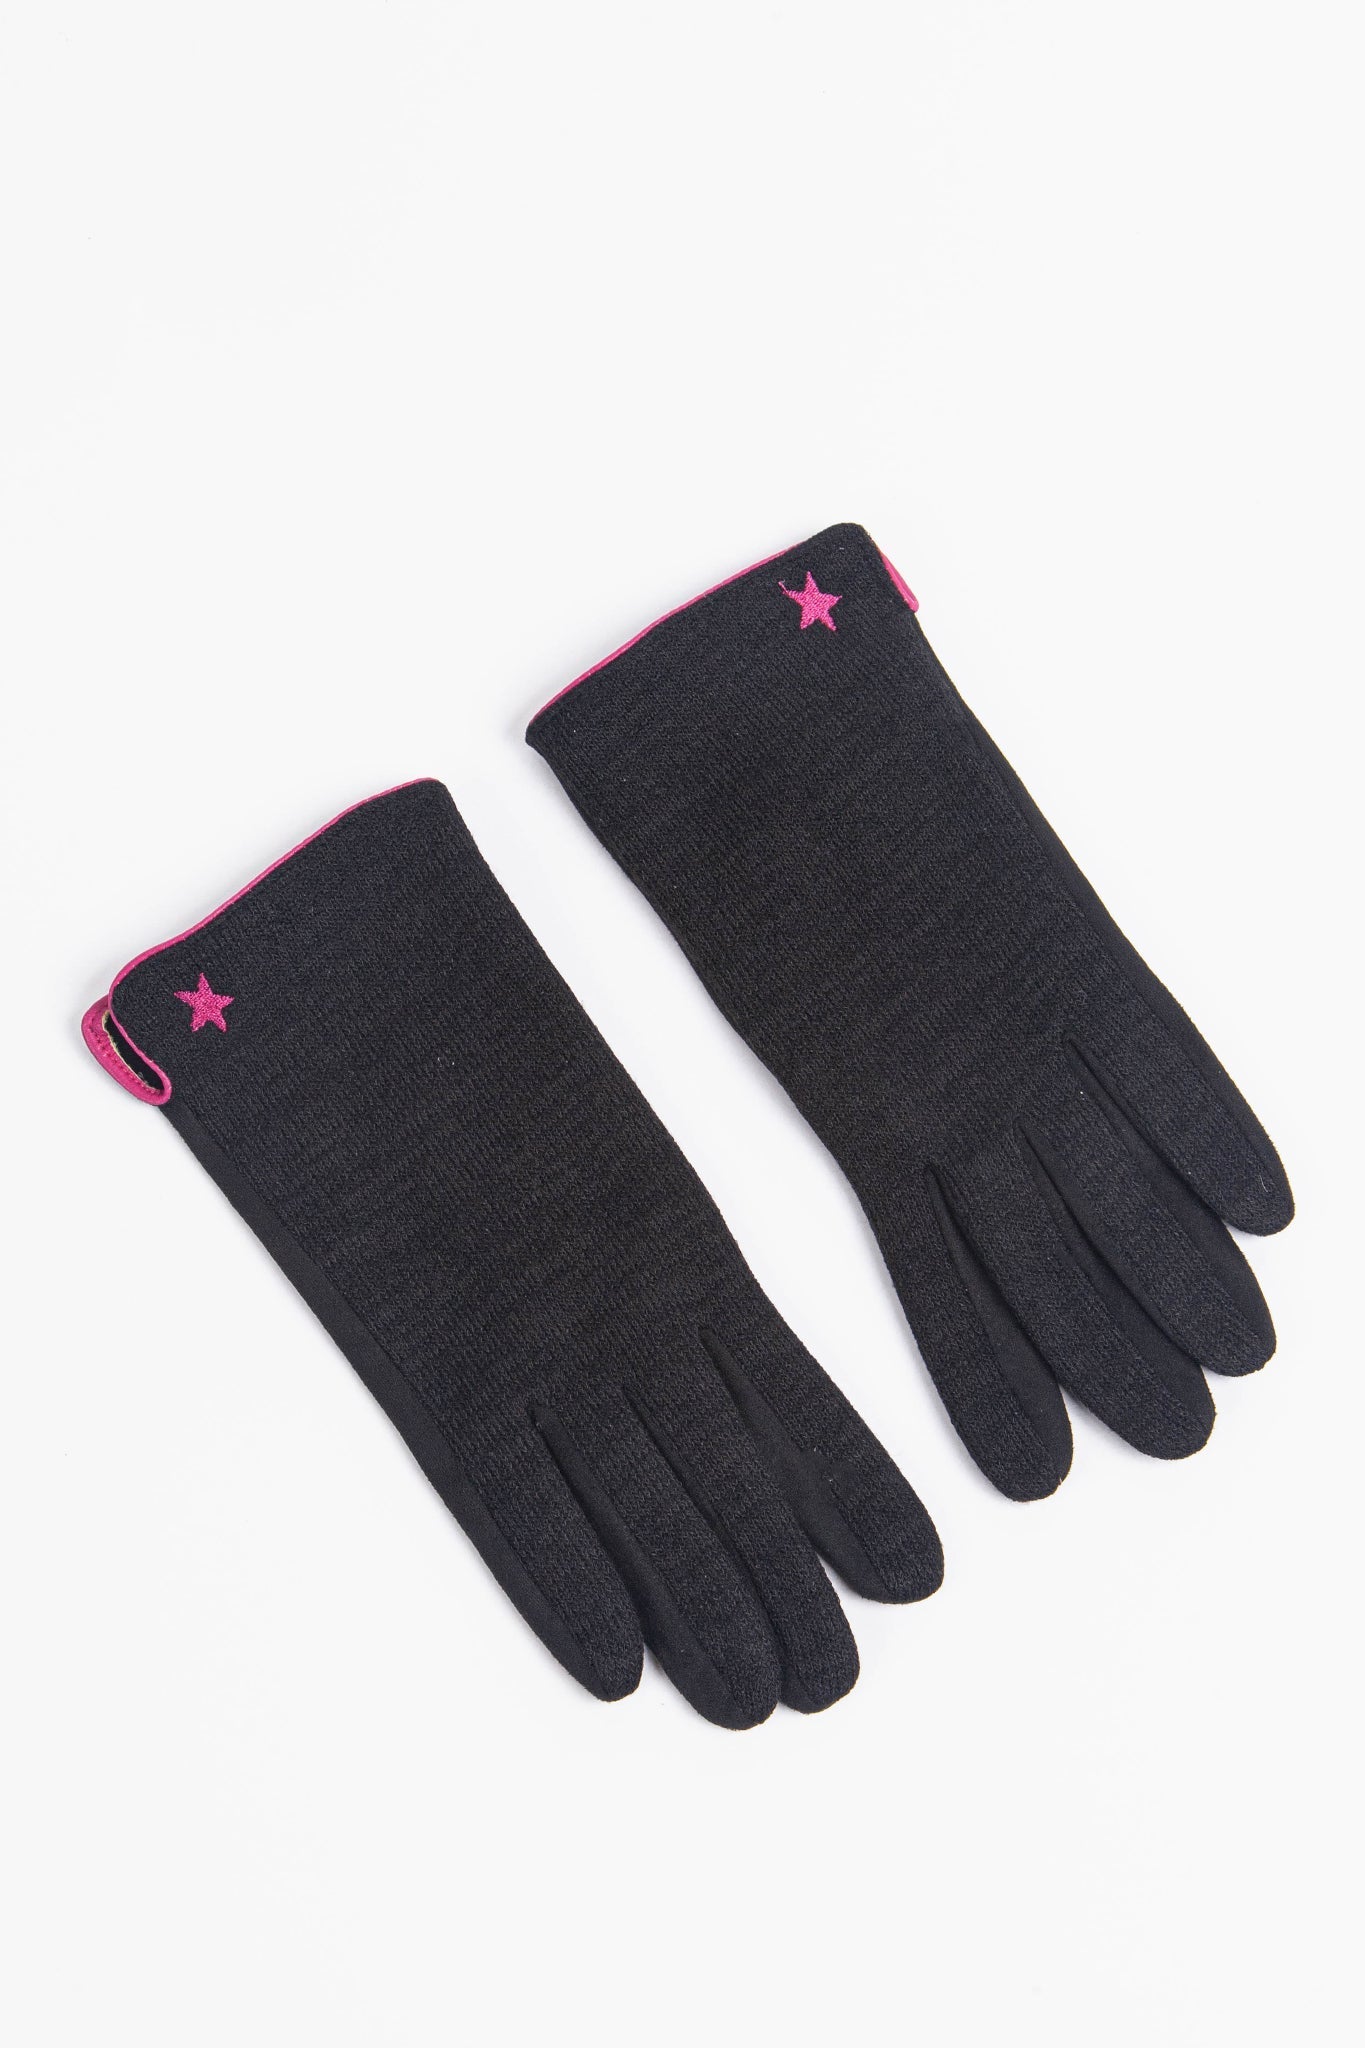 black touch screen winter gloves with a pink embroiidered star on the wrist